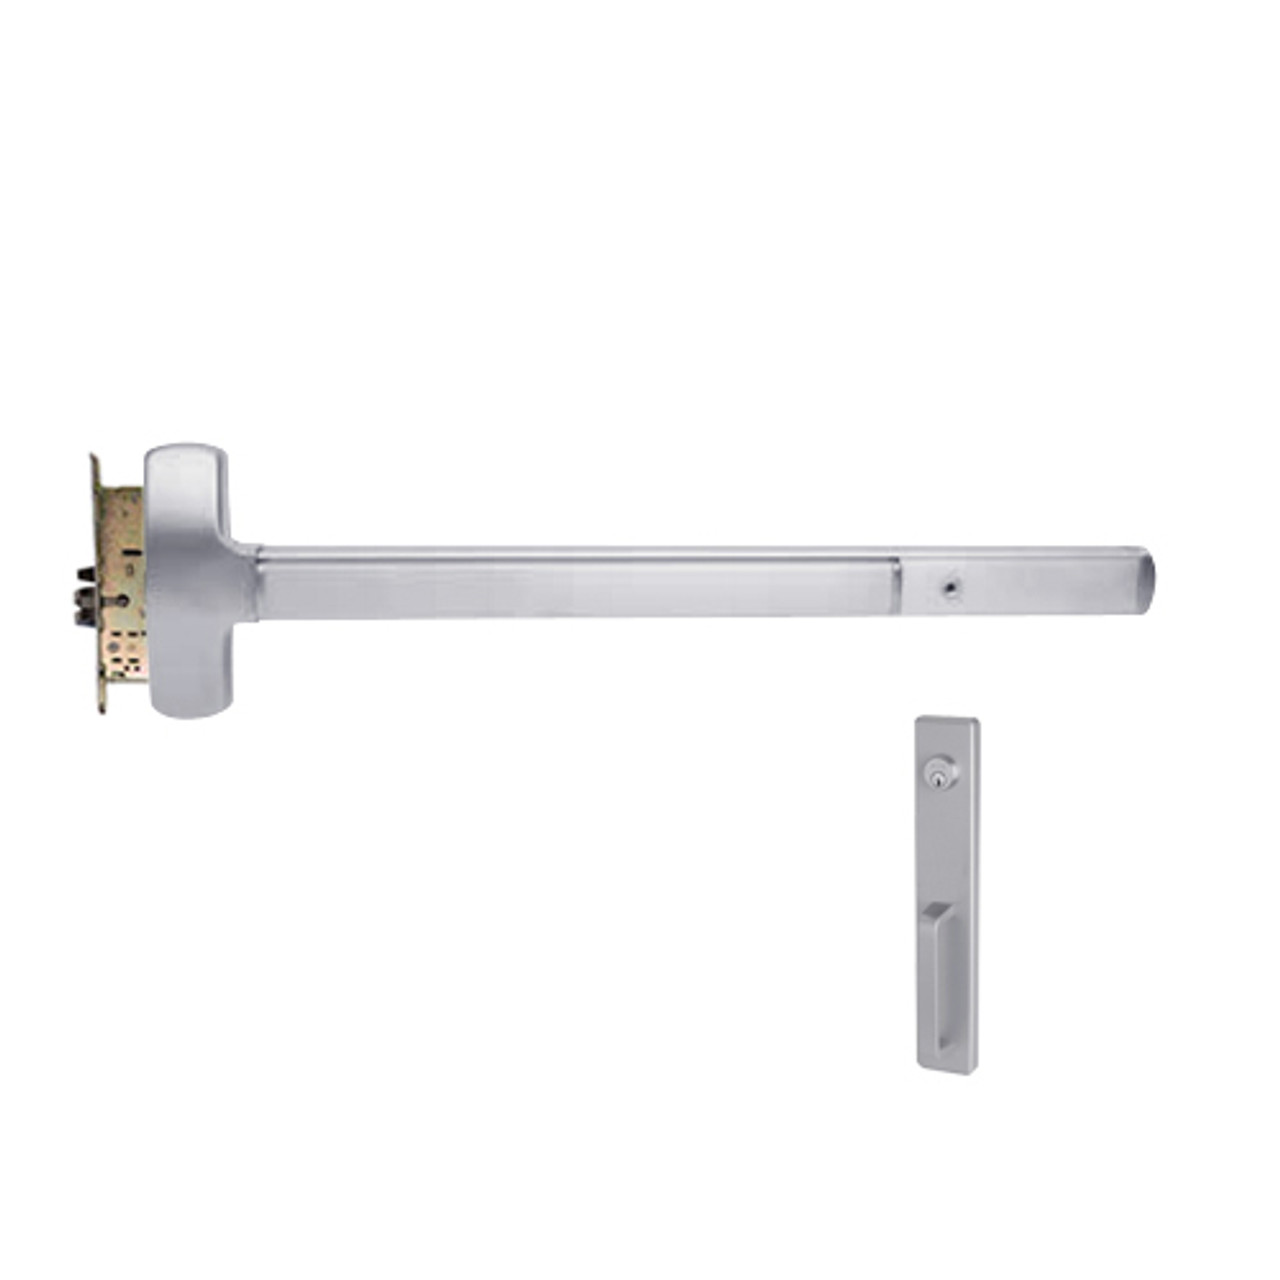 25-M-NL-US32-3-LHR Falcon Exit Device in Polished Stainless Steel